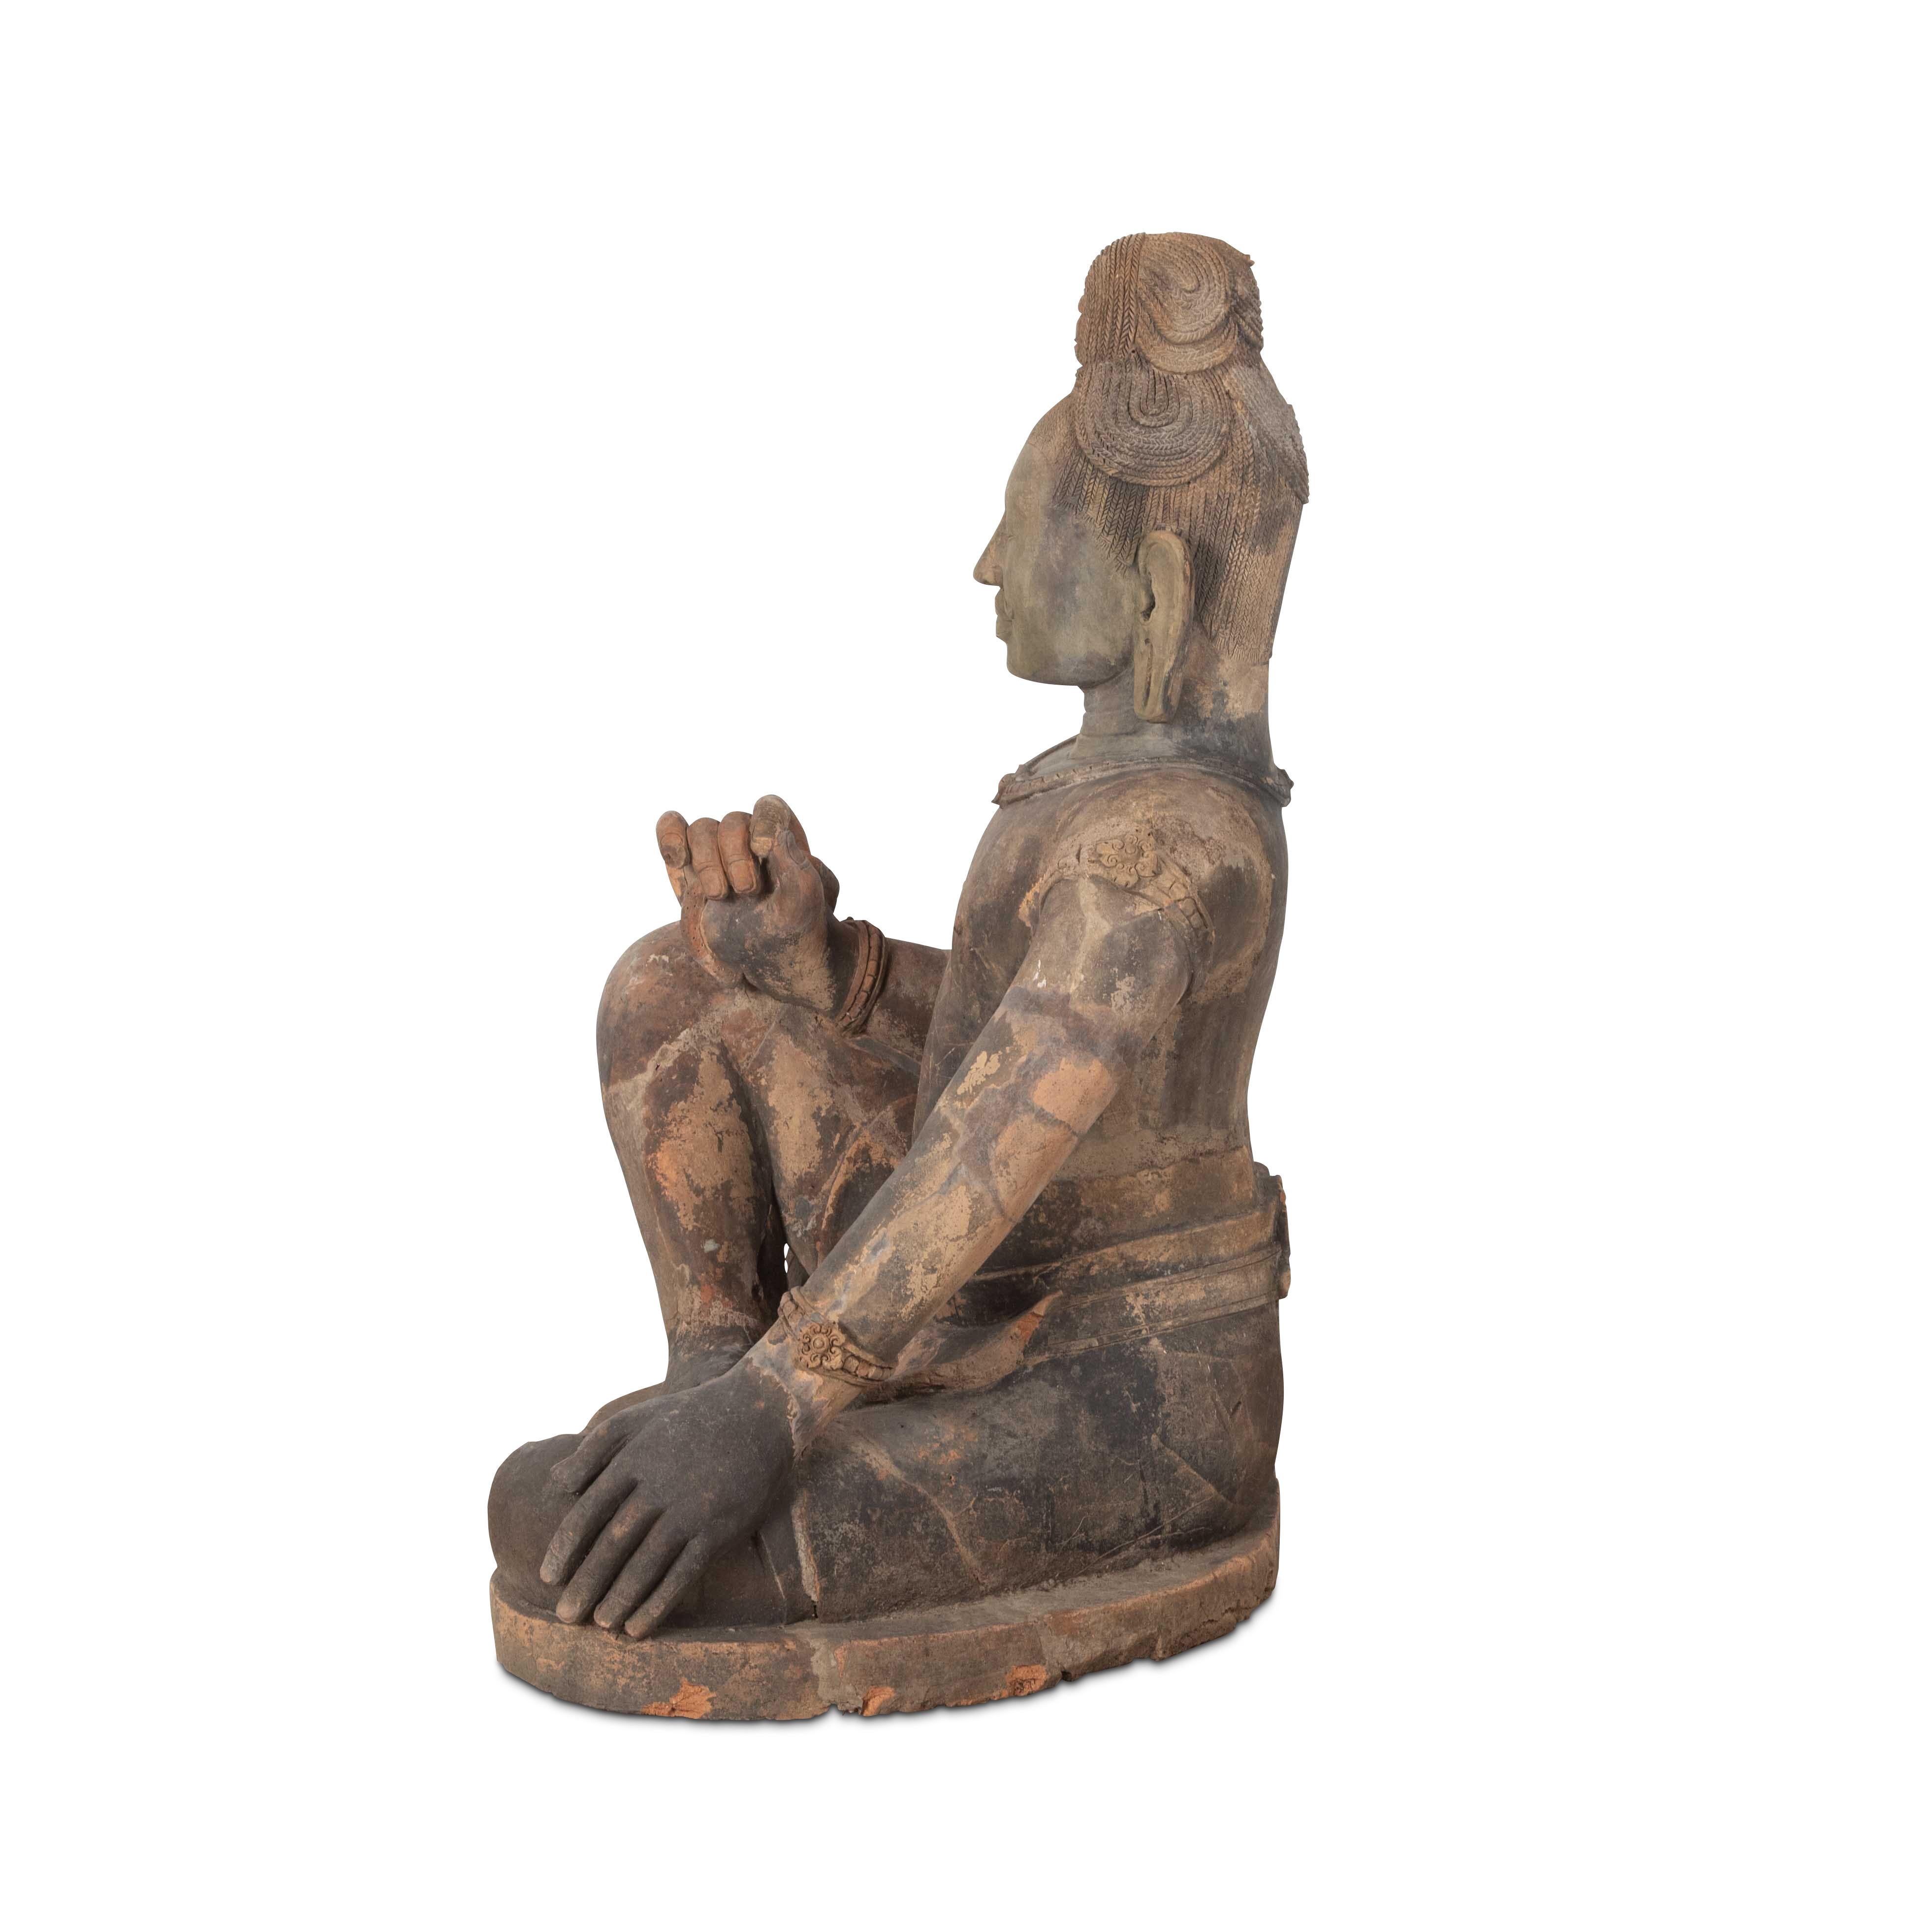 A very rare larger than life size late C18th/early C19th terracotta figure of a male diety, in the Khmer style, the figure sitting in a relaxed pose, with hair tied up and a serene content expression on his face. Featuring beaded bands around his